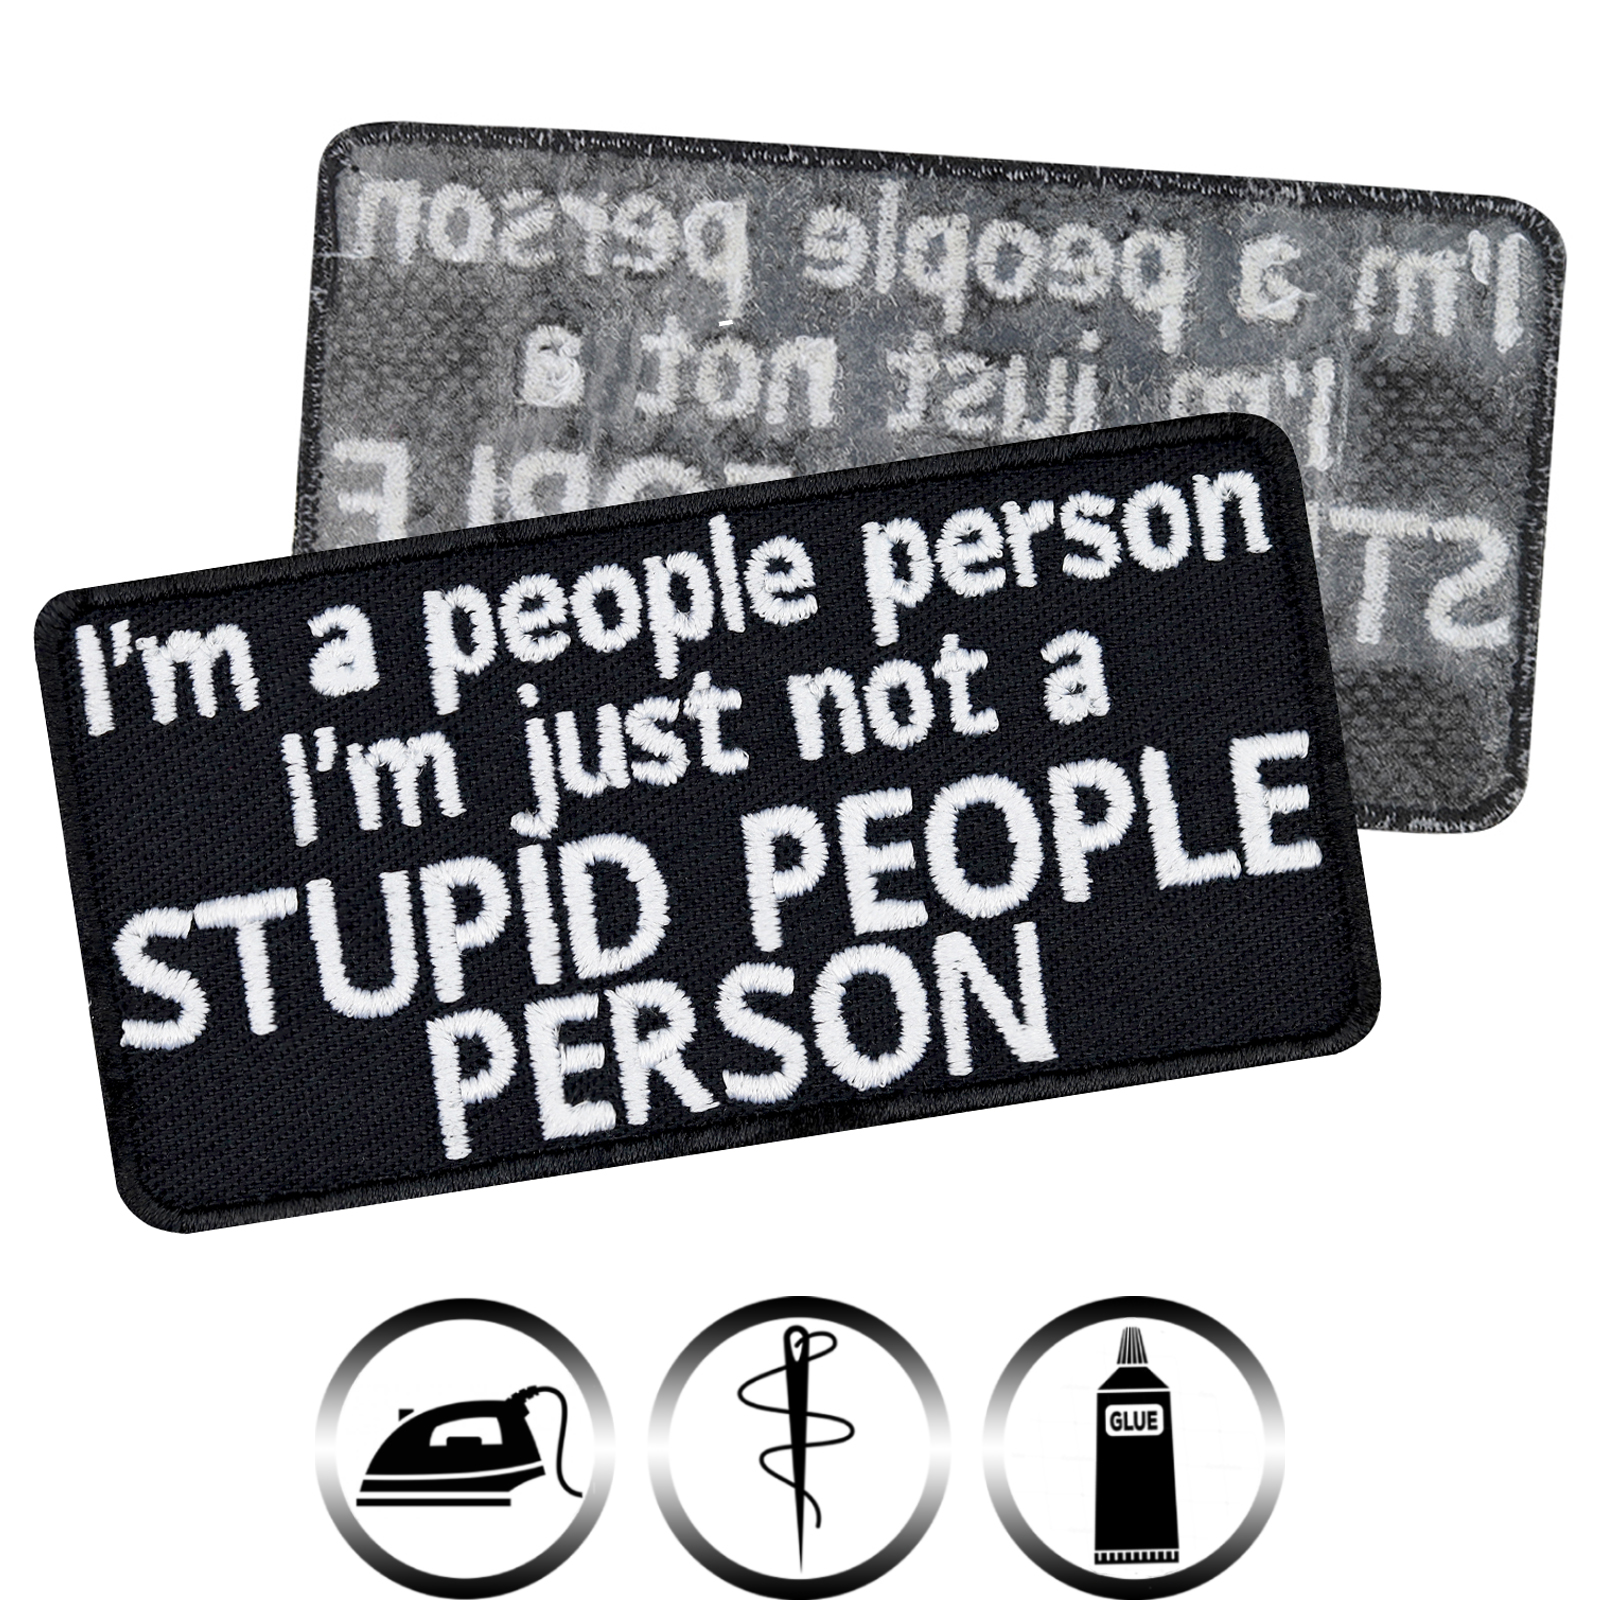 I'm not a stupid people person - Patch